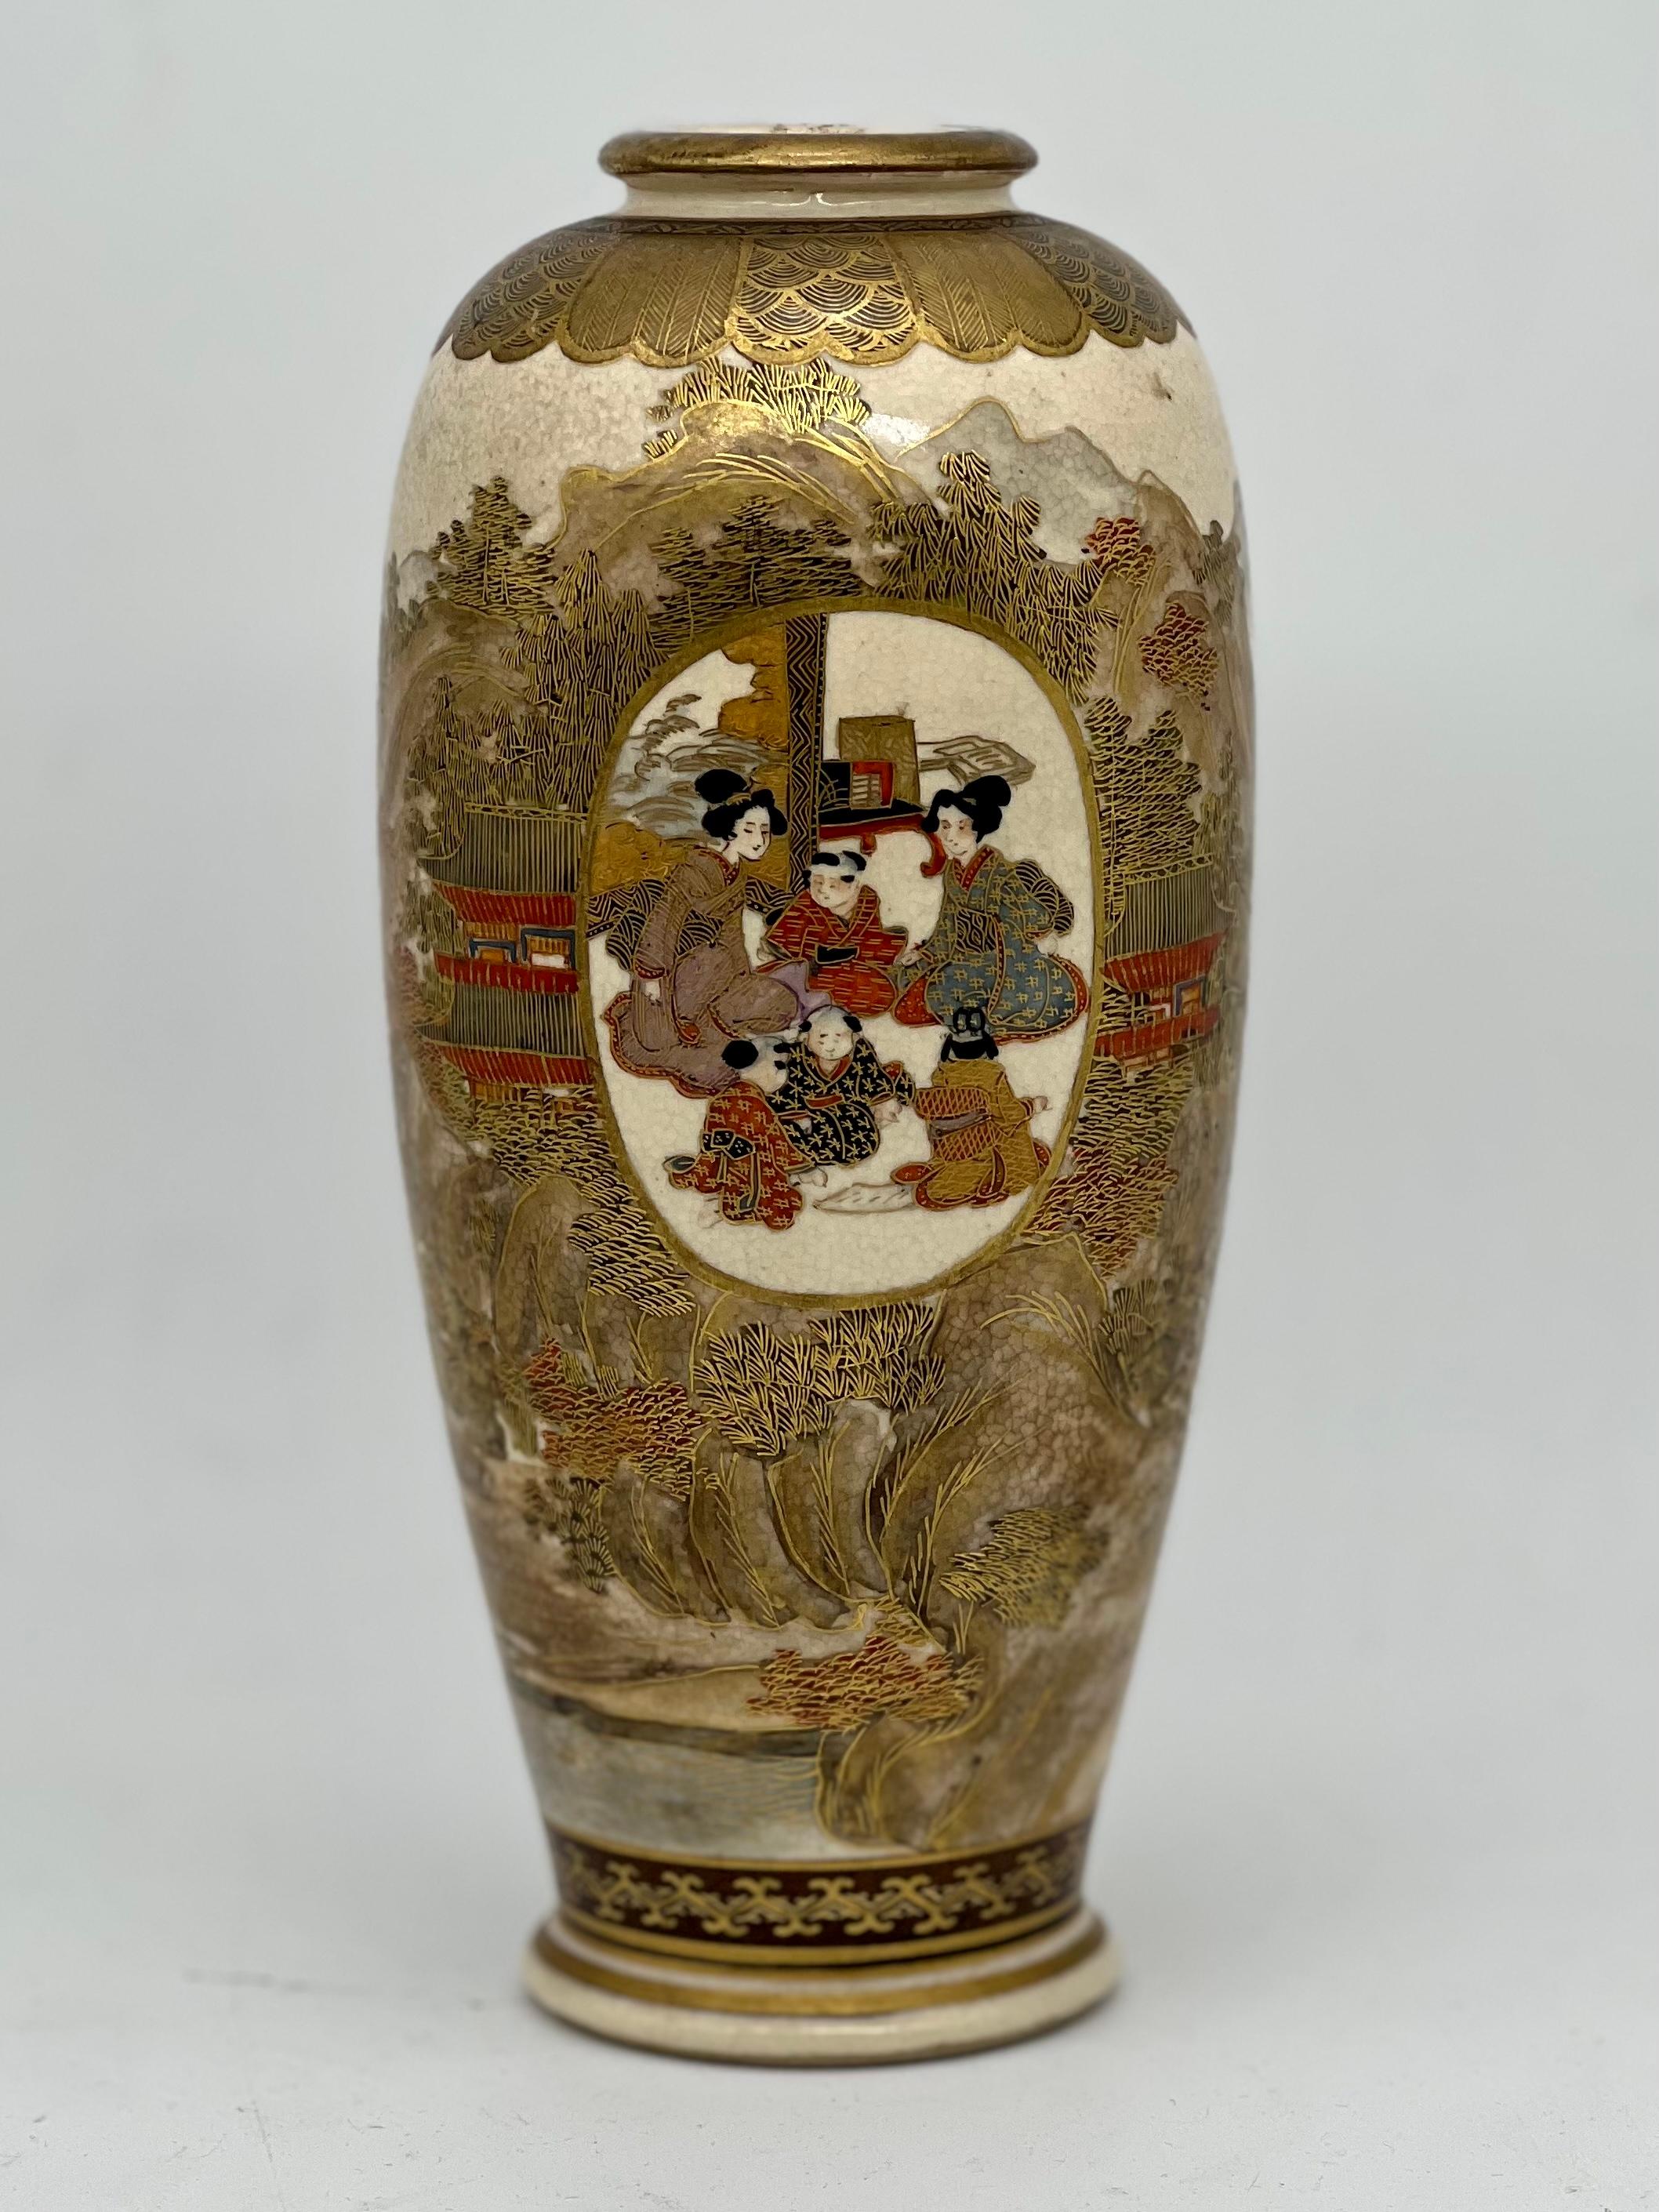 A Magnificent Japanese Satsuma Vase. Signed. Meiji period.

19th C


A Fine Japanese satsuma vase of a baluster form finely painted in Satsuma enamels enhanced with gold paint,decorated with a panel in the middle depicting japanese women and